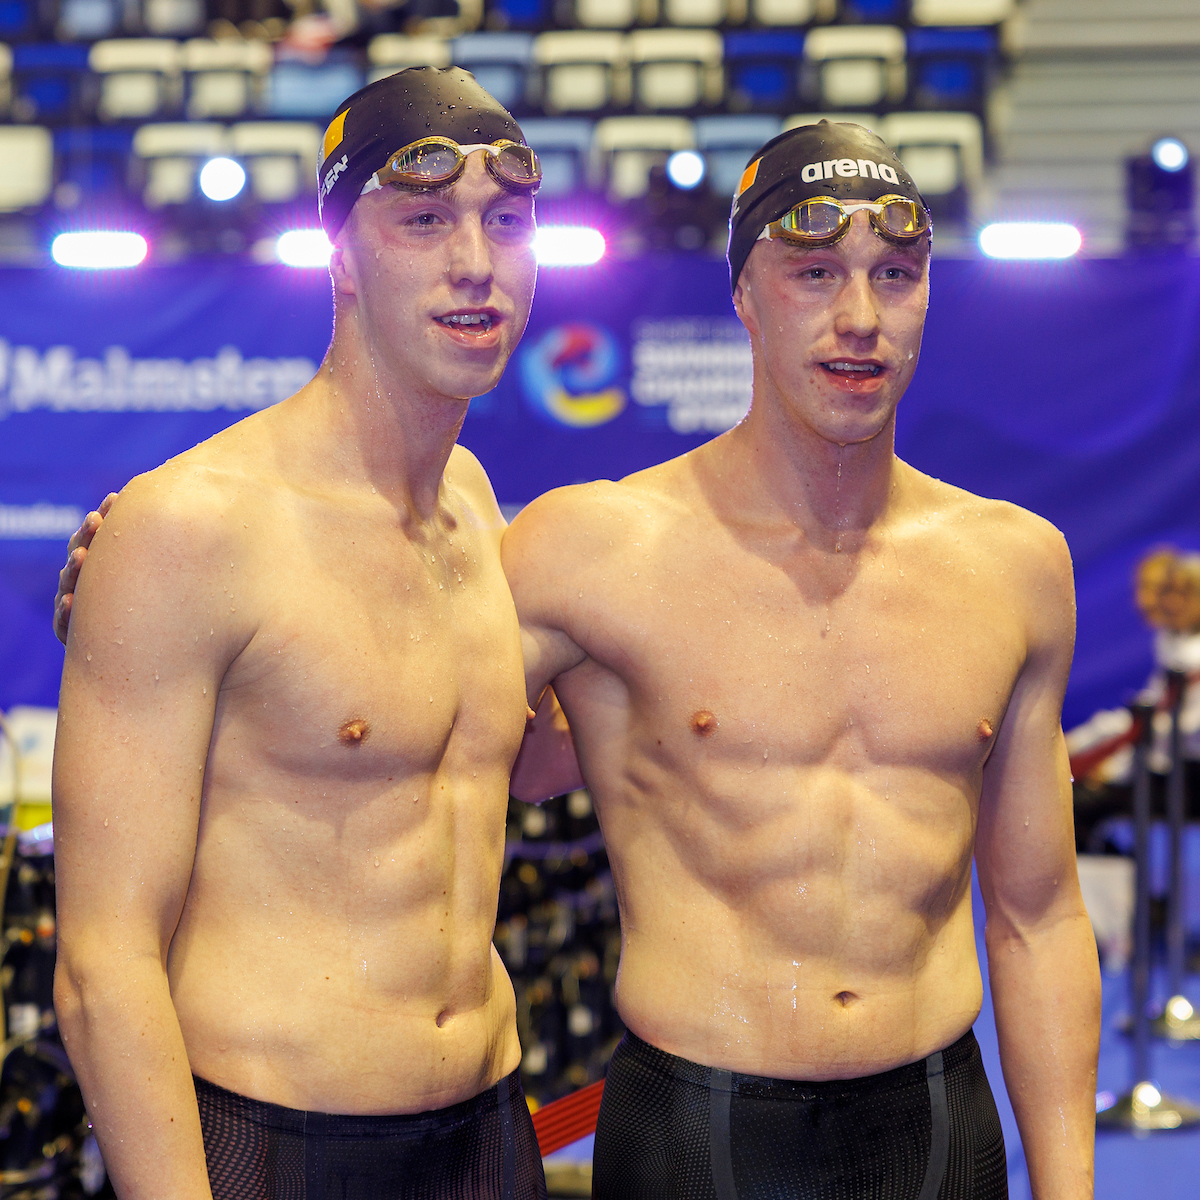 It's another FINAL for Daniel and Nathan Wiffen! The duo are both back tomorrow for the 800m Freestyle Final. 7.33.38 (1st) for Daniel and a whopping 12 second pb for Nathan (5th) 7:34.78. #LENOtopeni23 #TeamIreland